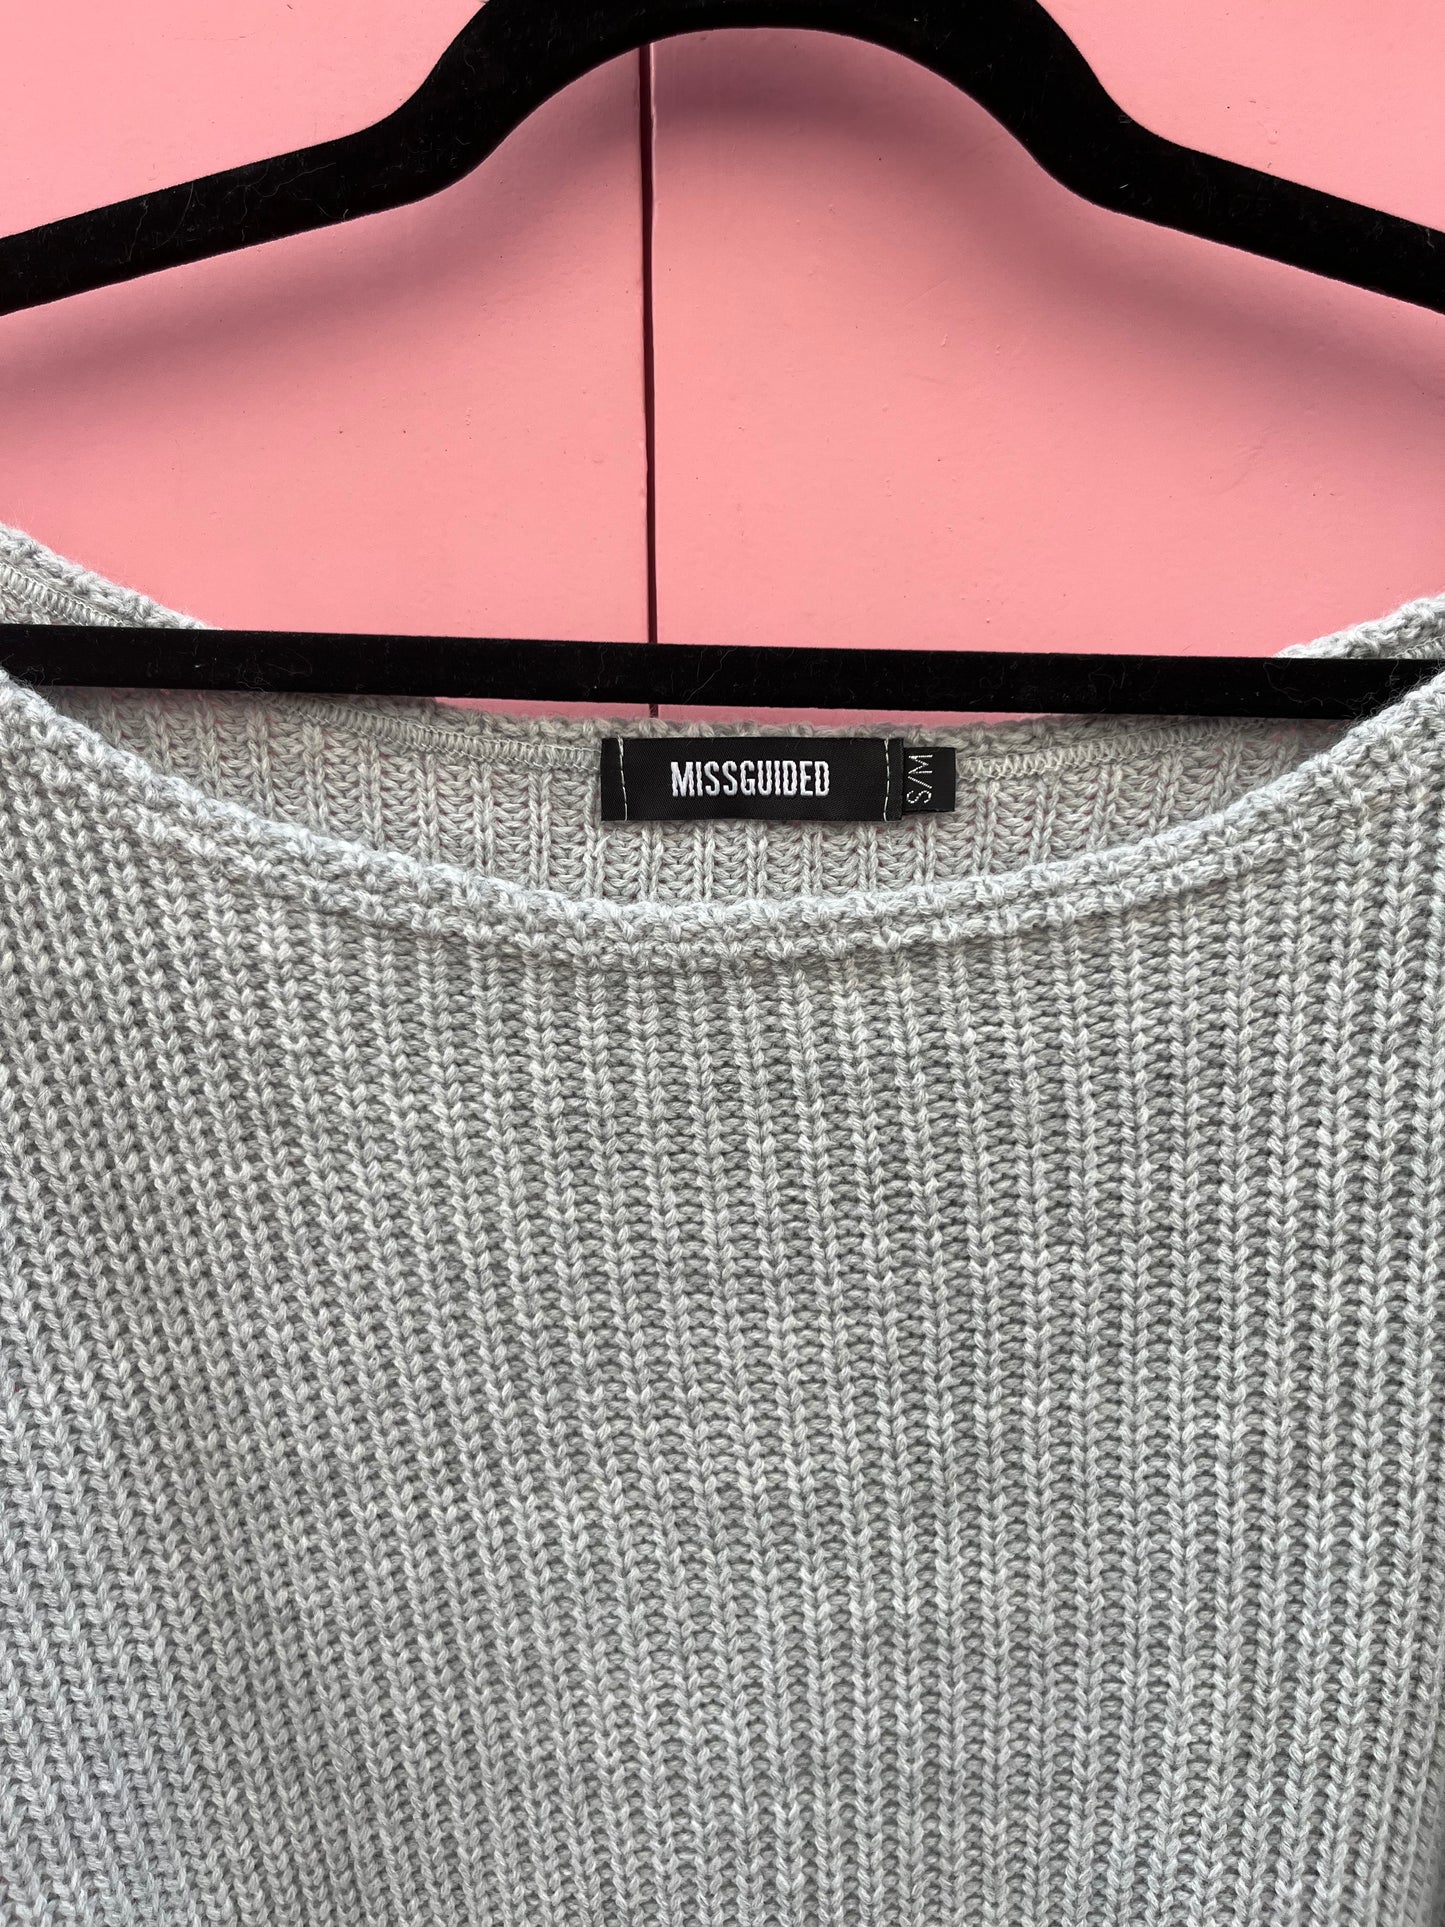 Le pull, MISSGUIDED, taille 34-36